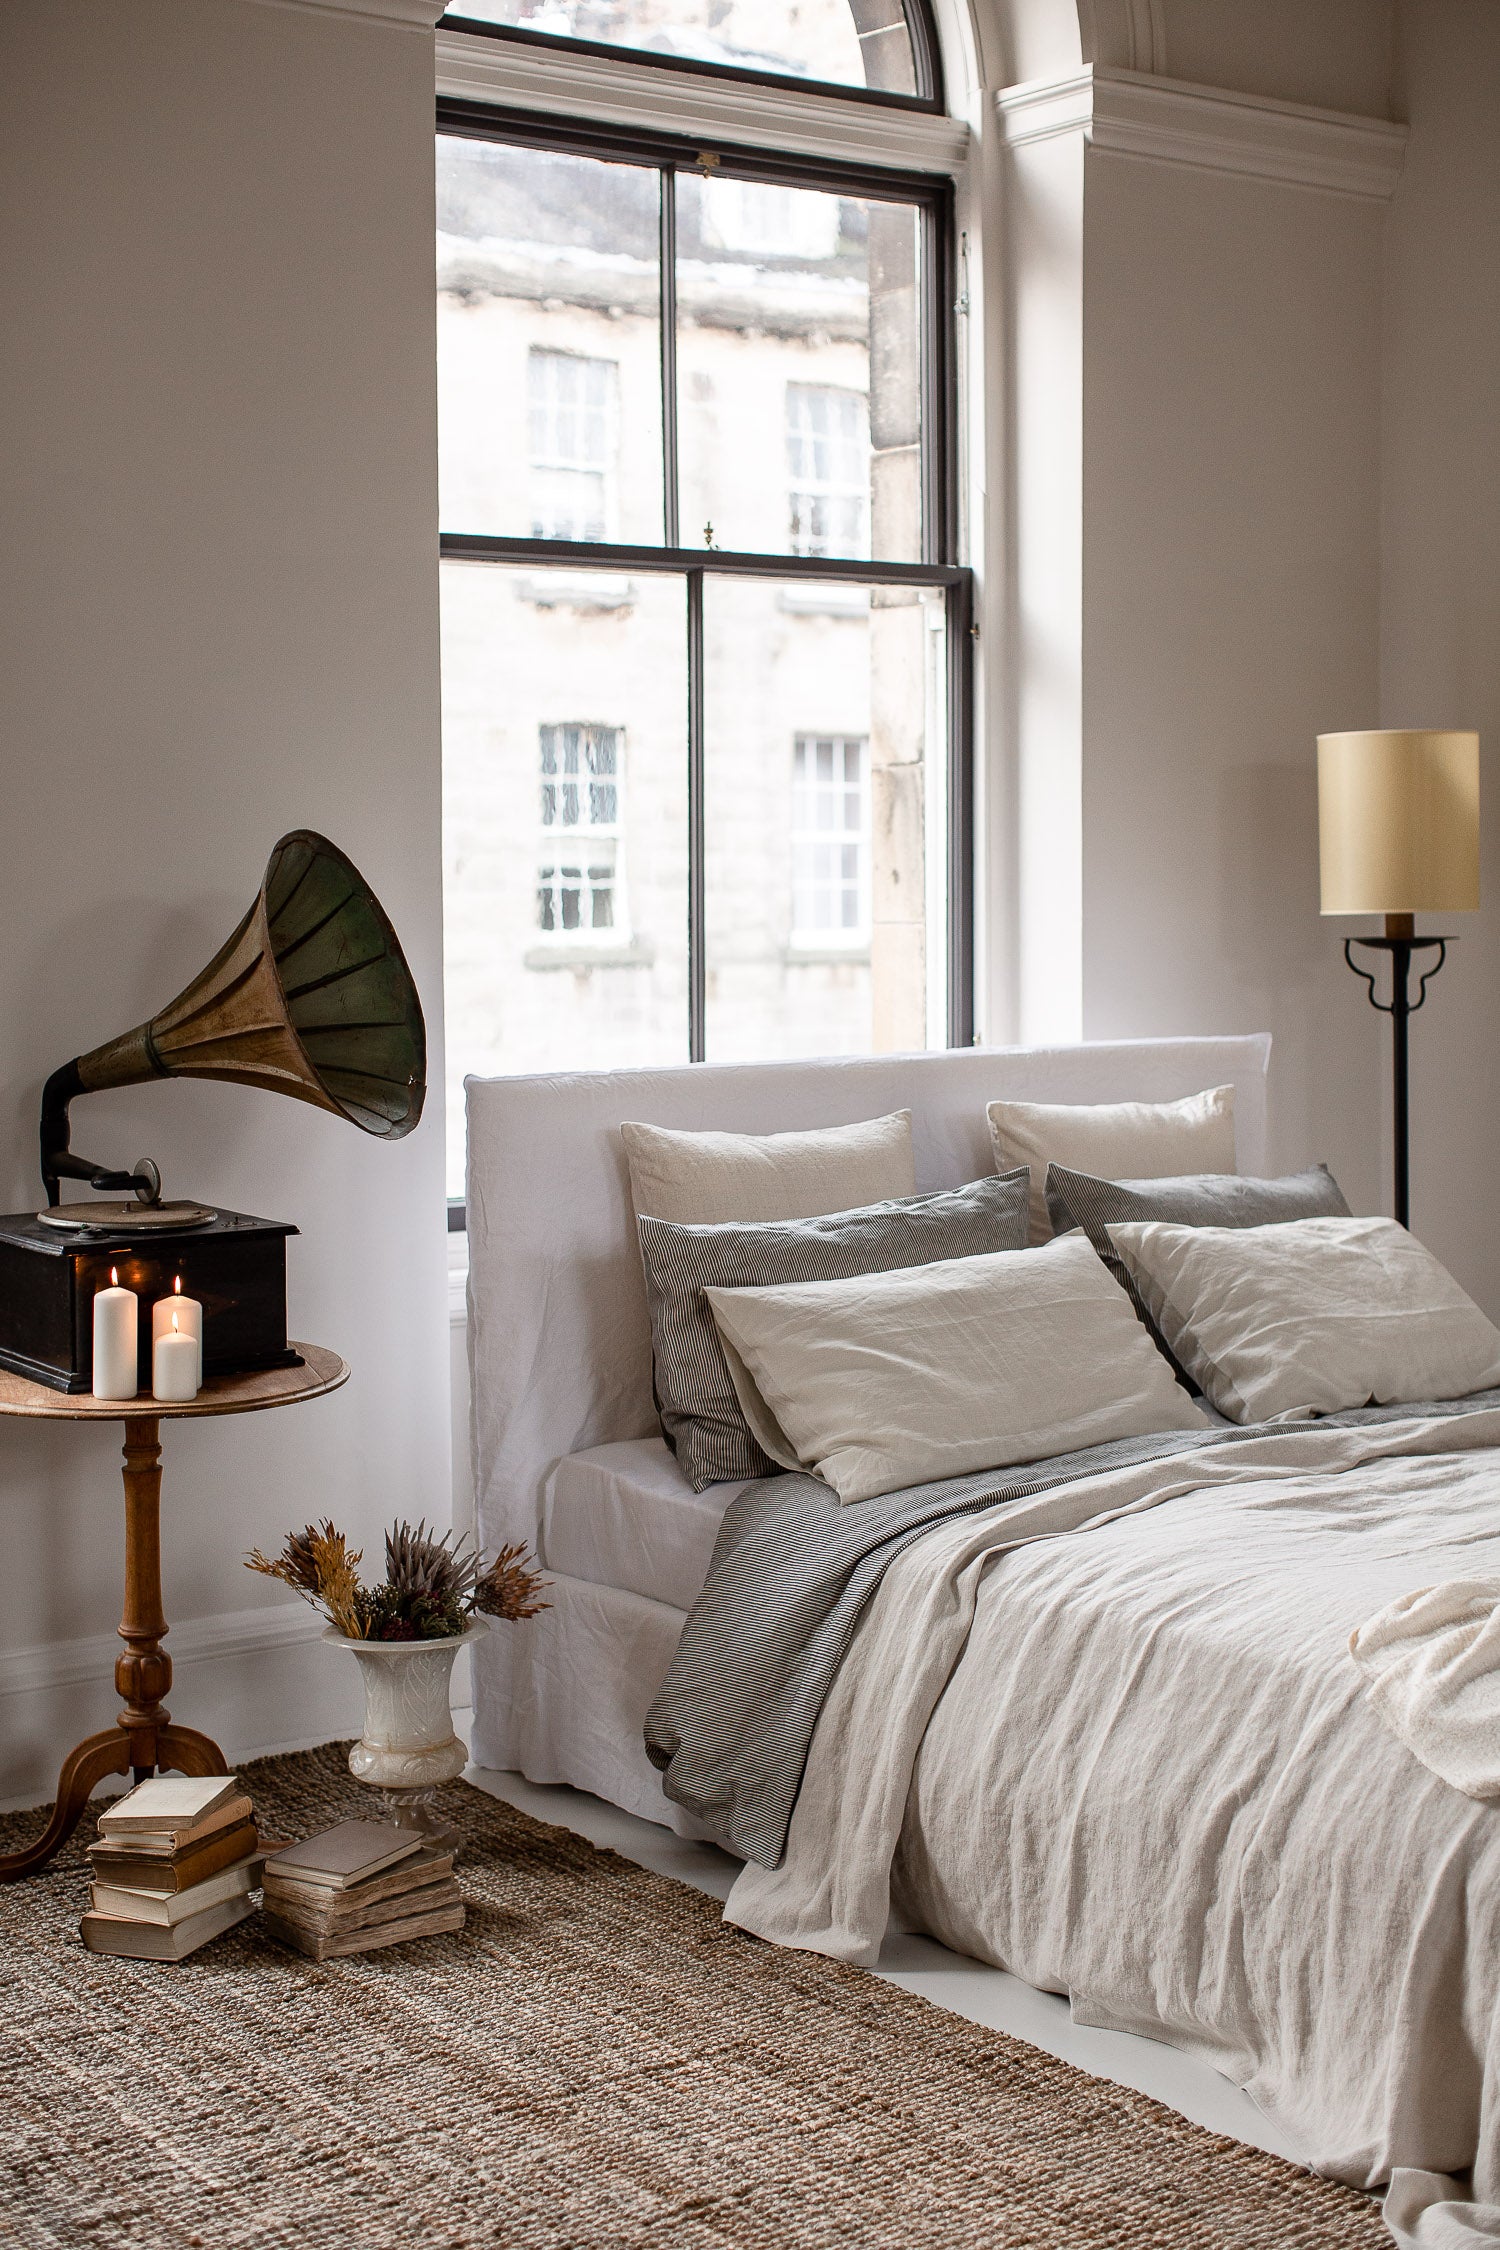 Ethically and sustainably produced Belgian linen bedding